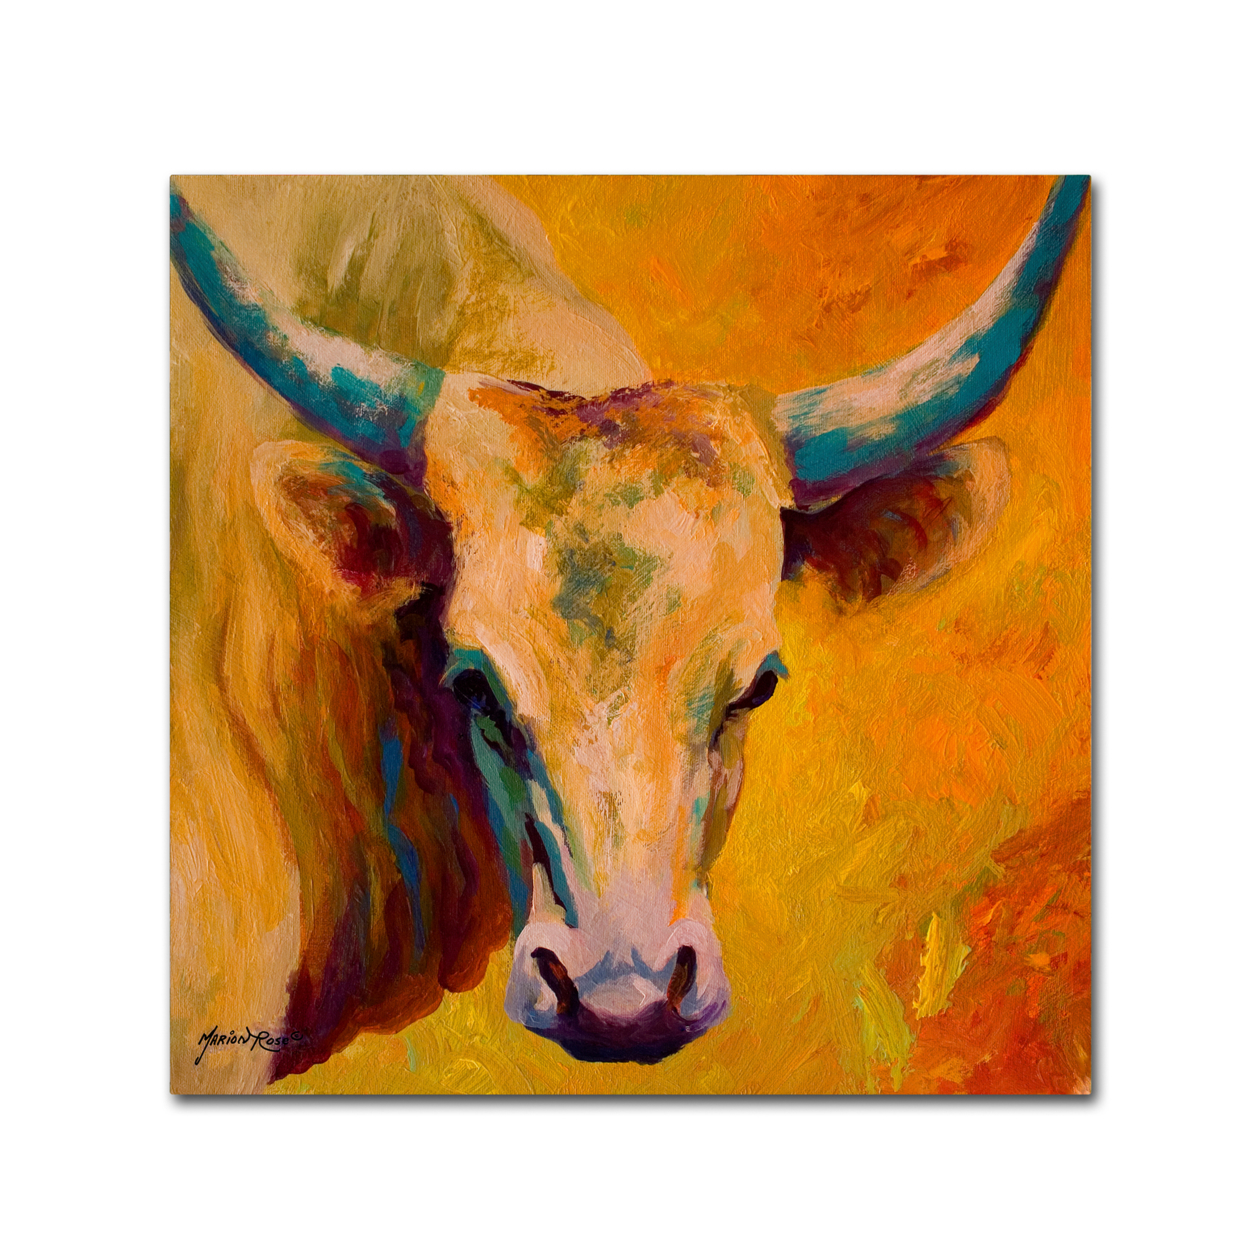 Marion Rose 'Creamy Texan' Ready To Hang Canvas Art 24 X 24 Inches Made In USA